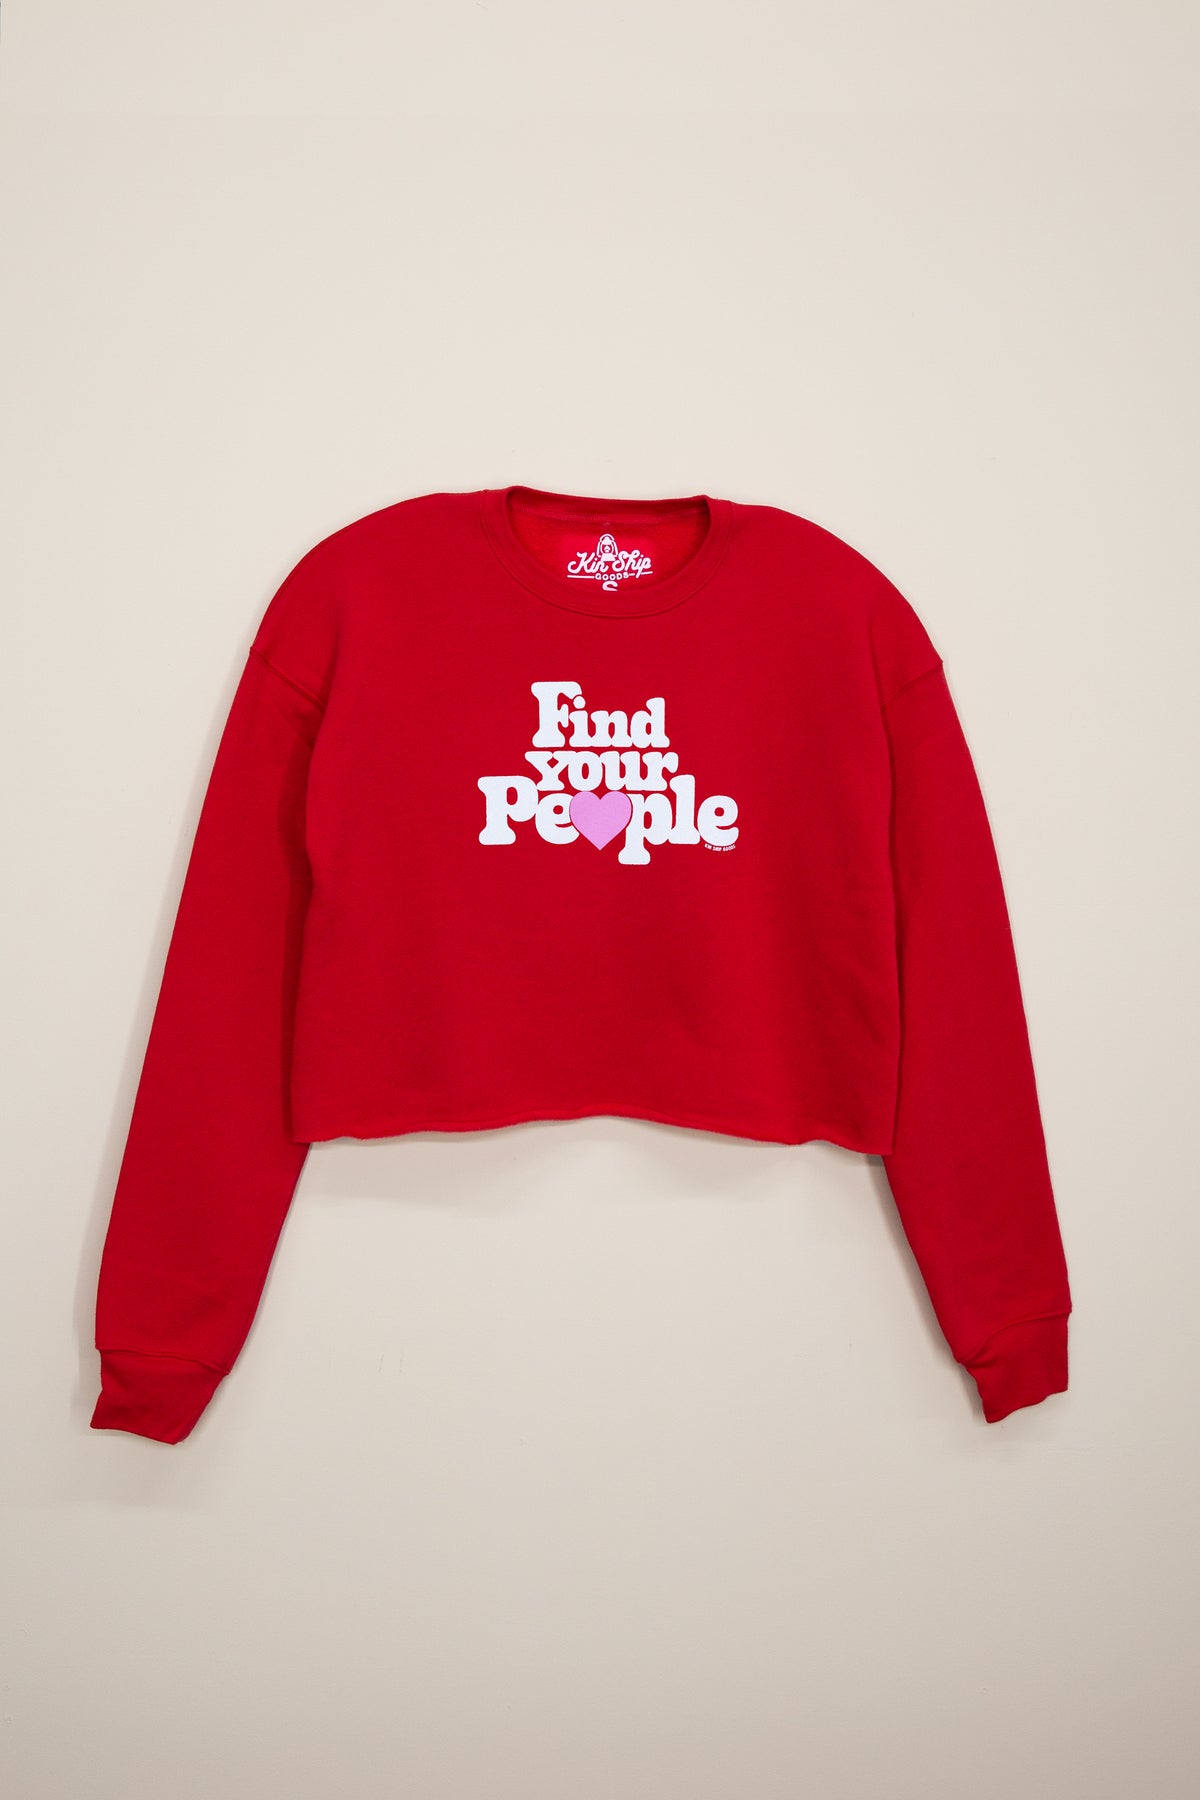 find your people cropped sweatshirt, final sale